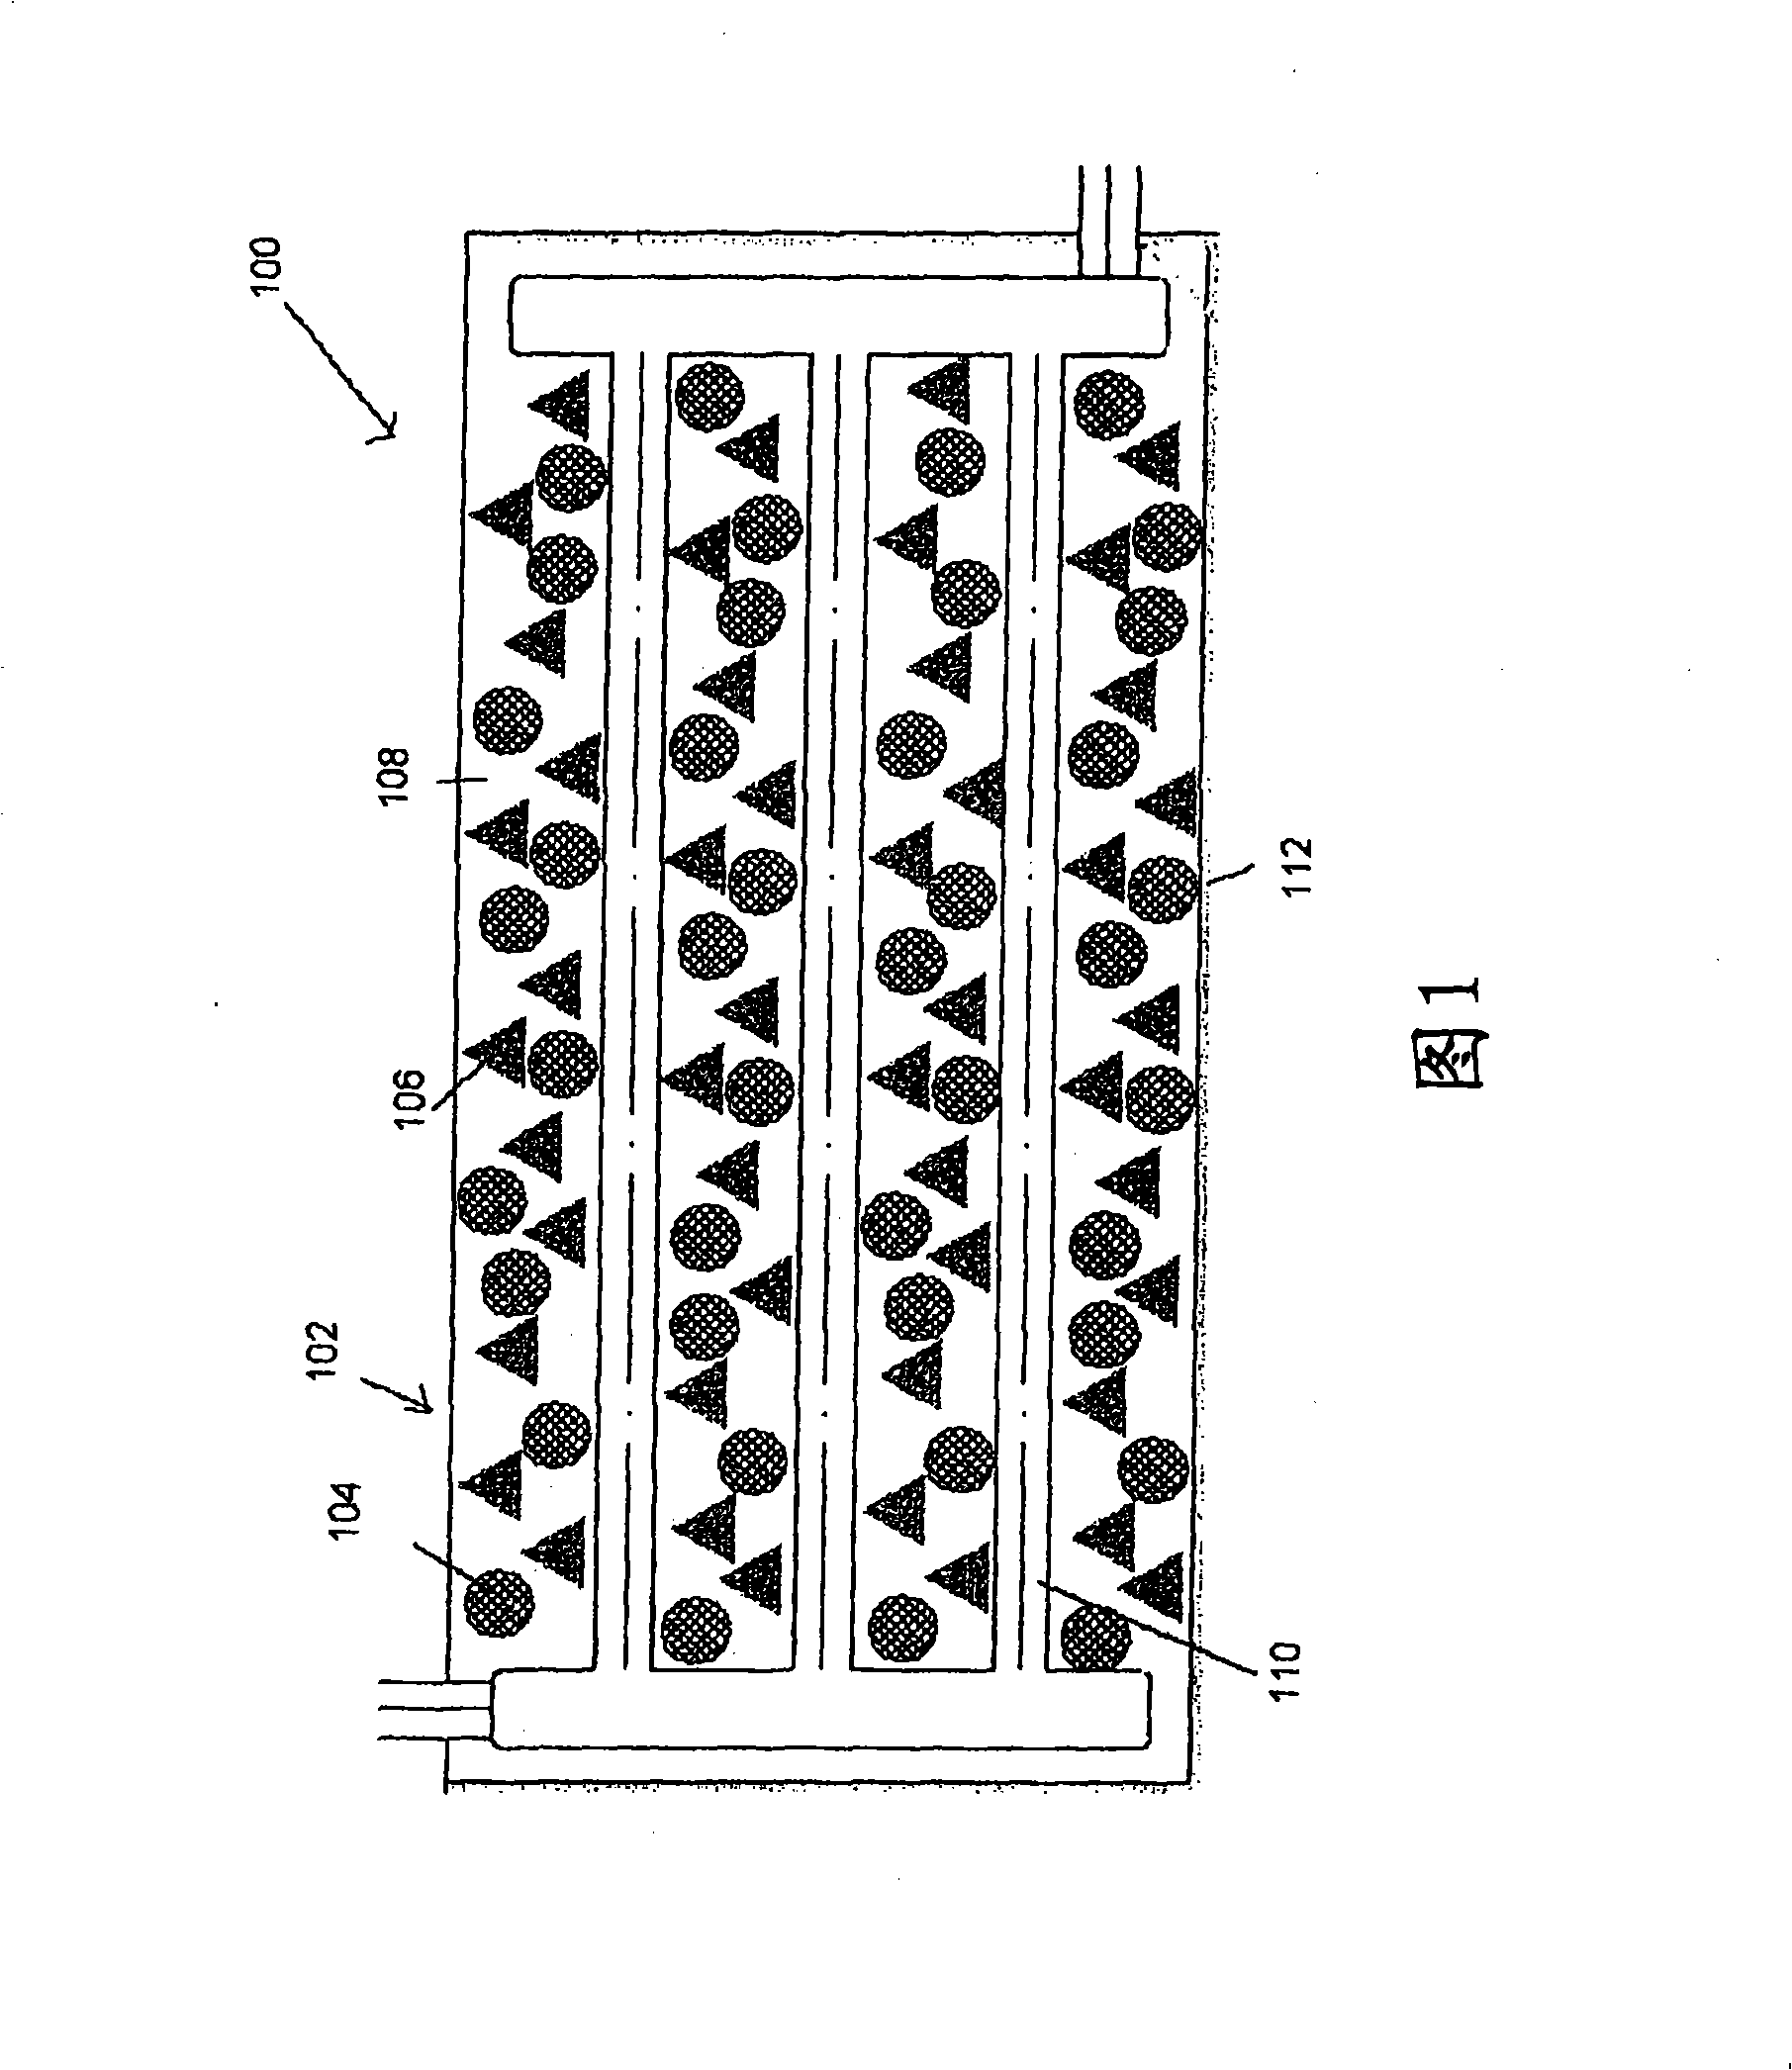 Latent heat storage material and preparation method of the latent heat storage material